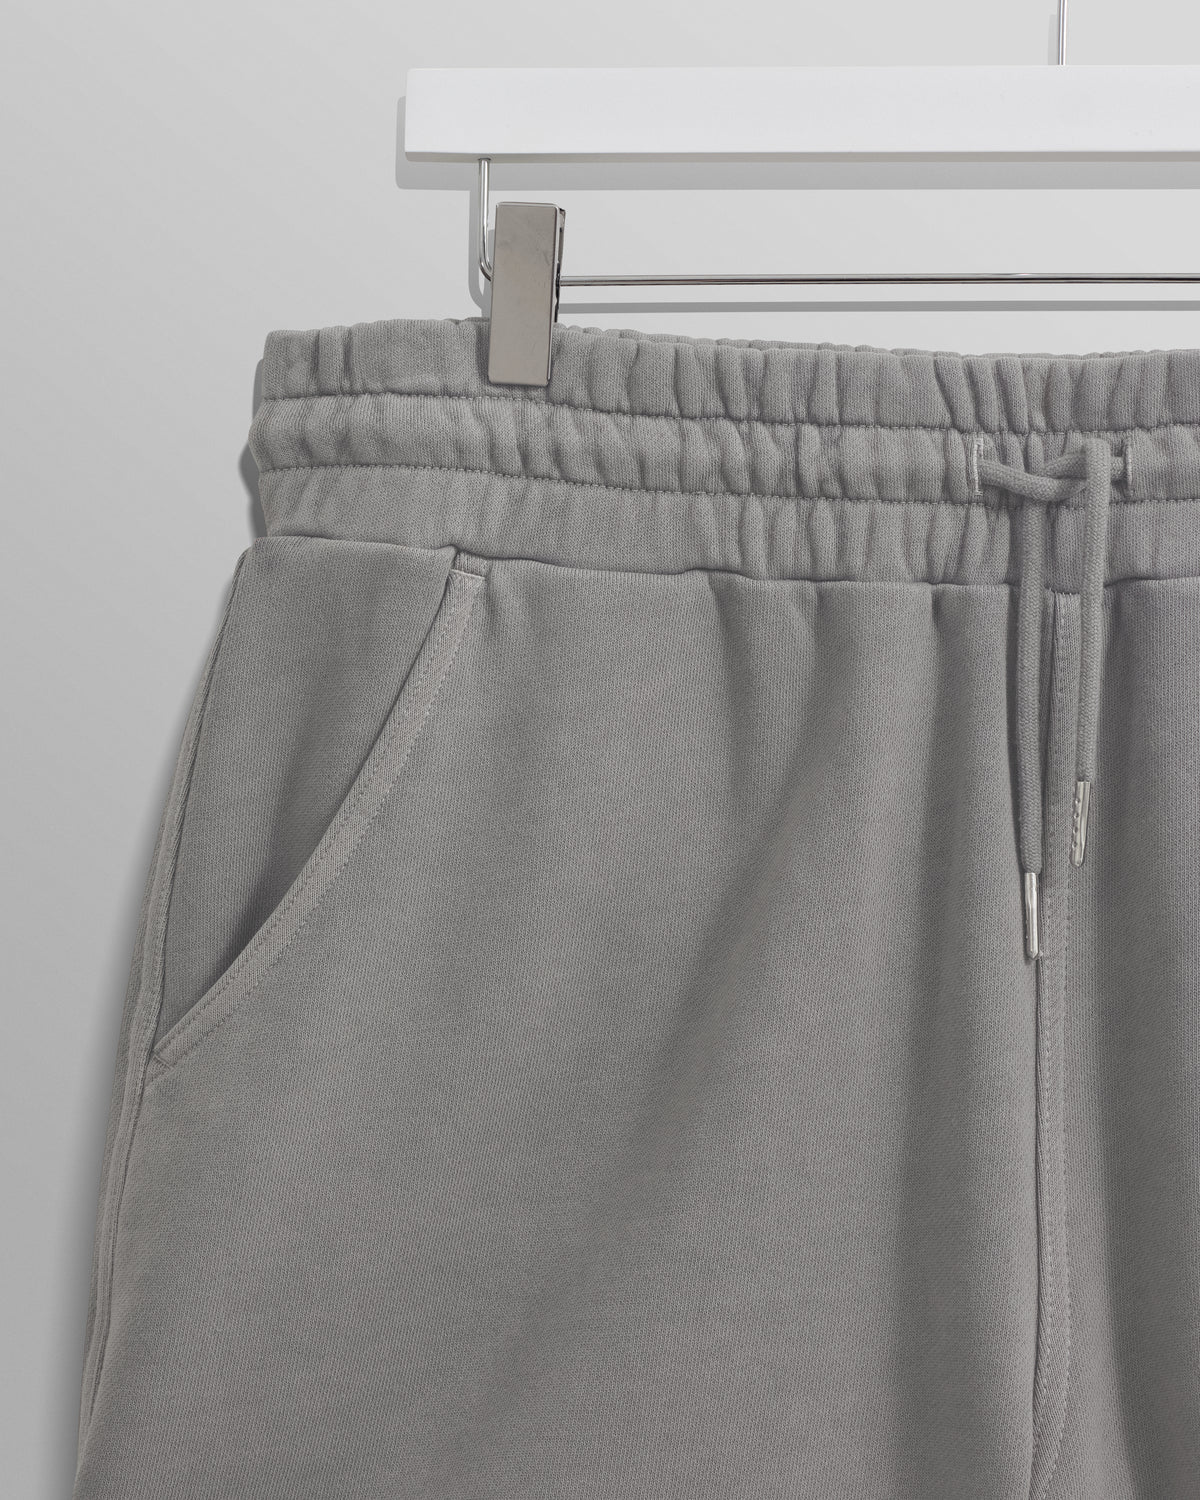 Dudley Sweat Short Grey Loopback Terry